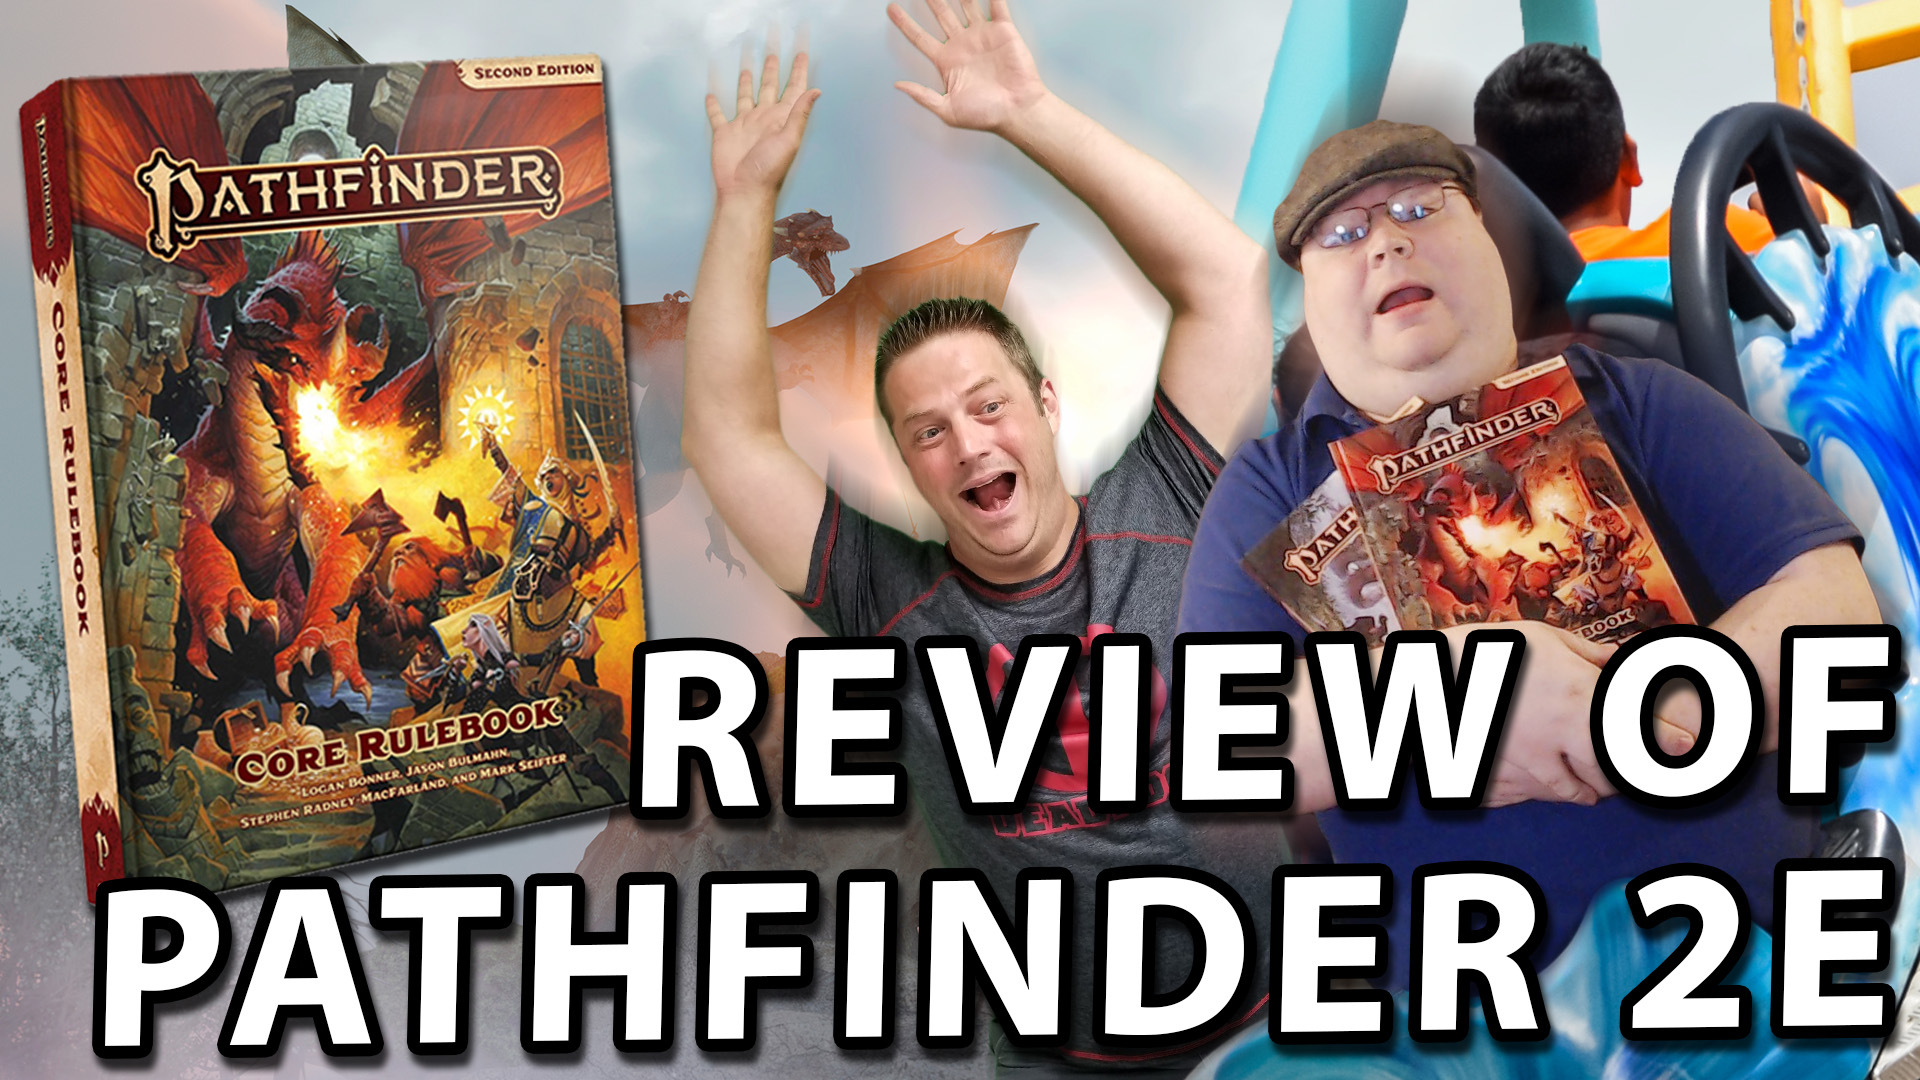 Review of Pathfinder Second Edition, Ryan and PErram in a roller coaster being chased by a dragon